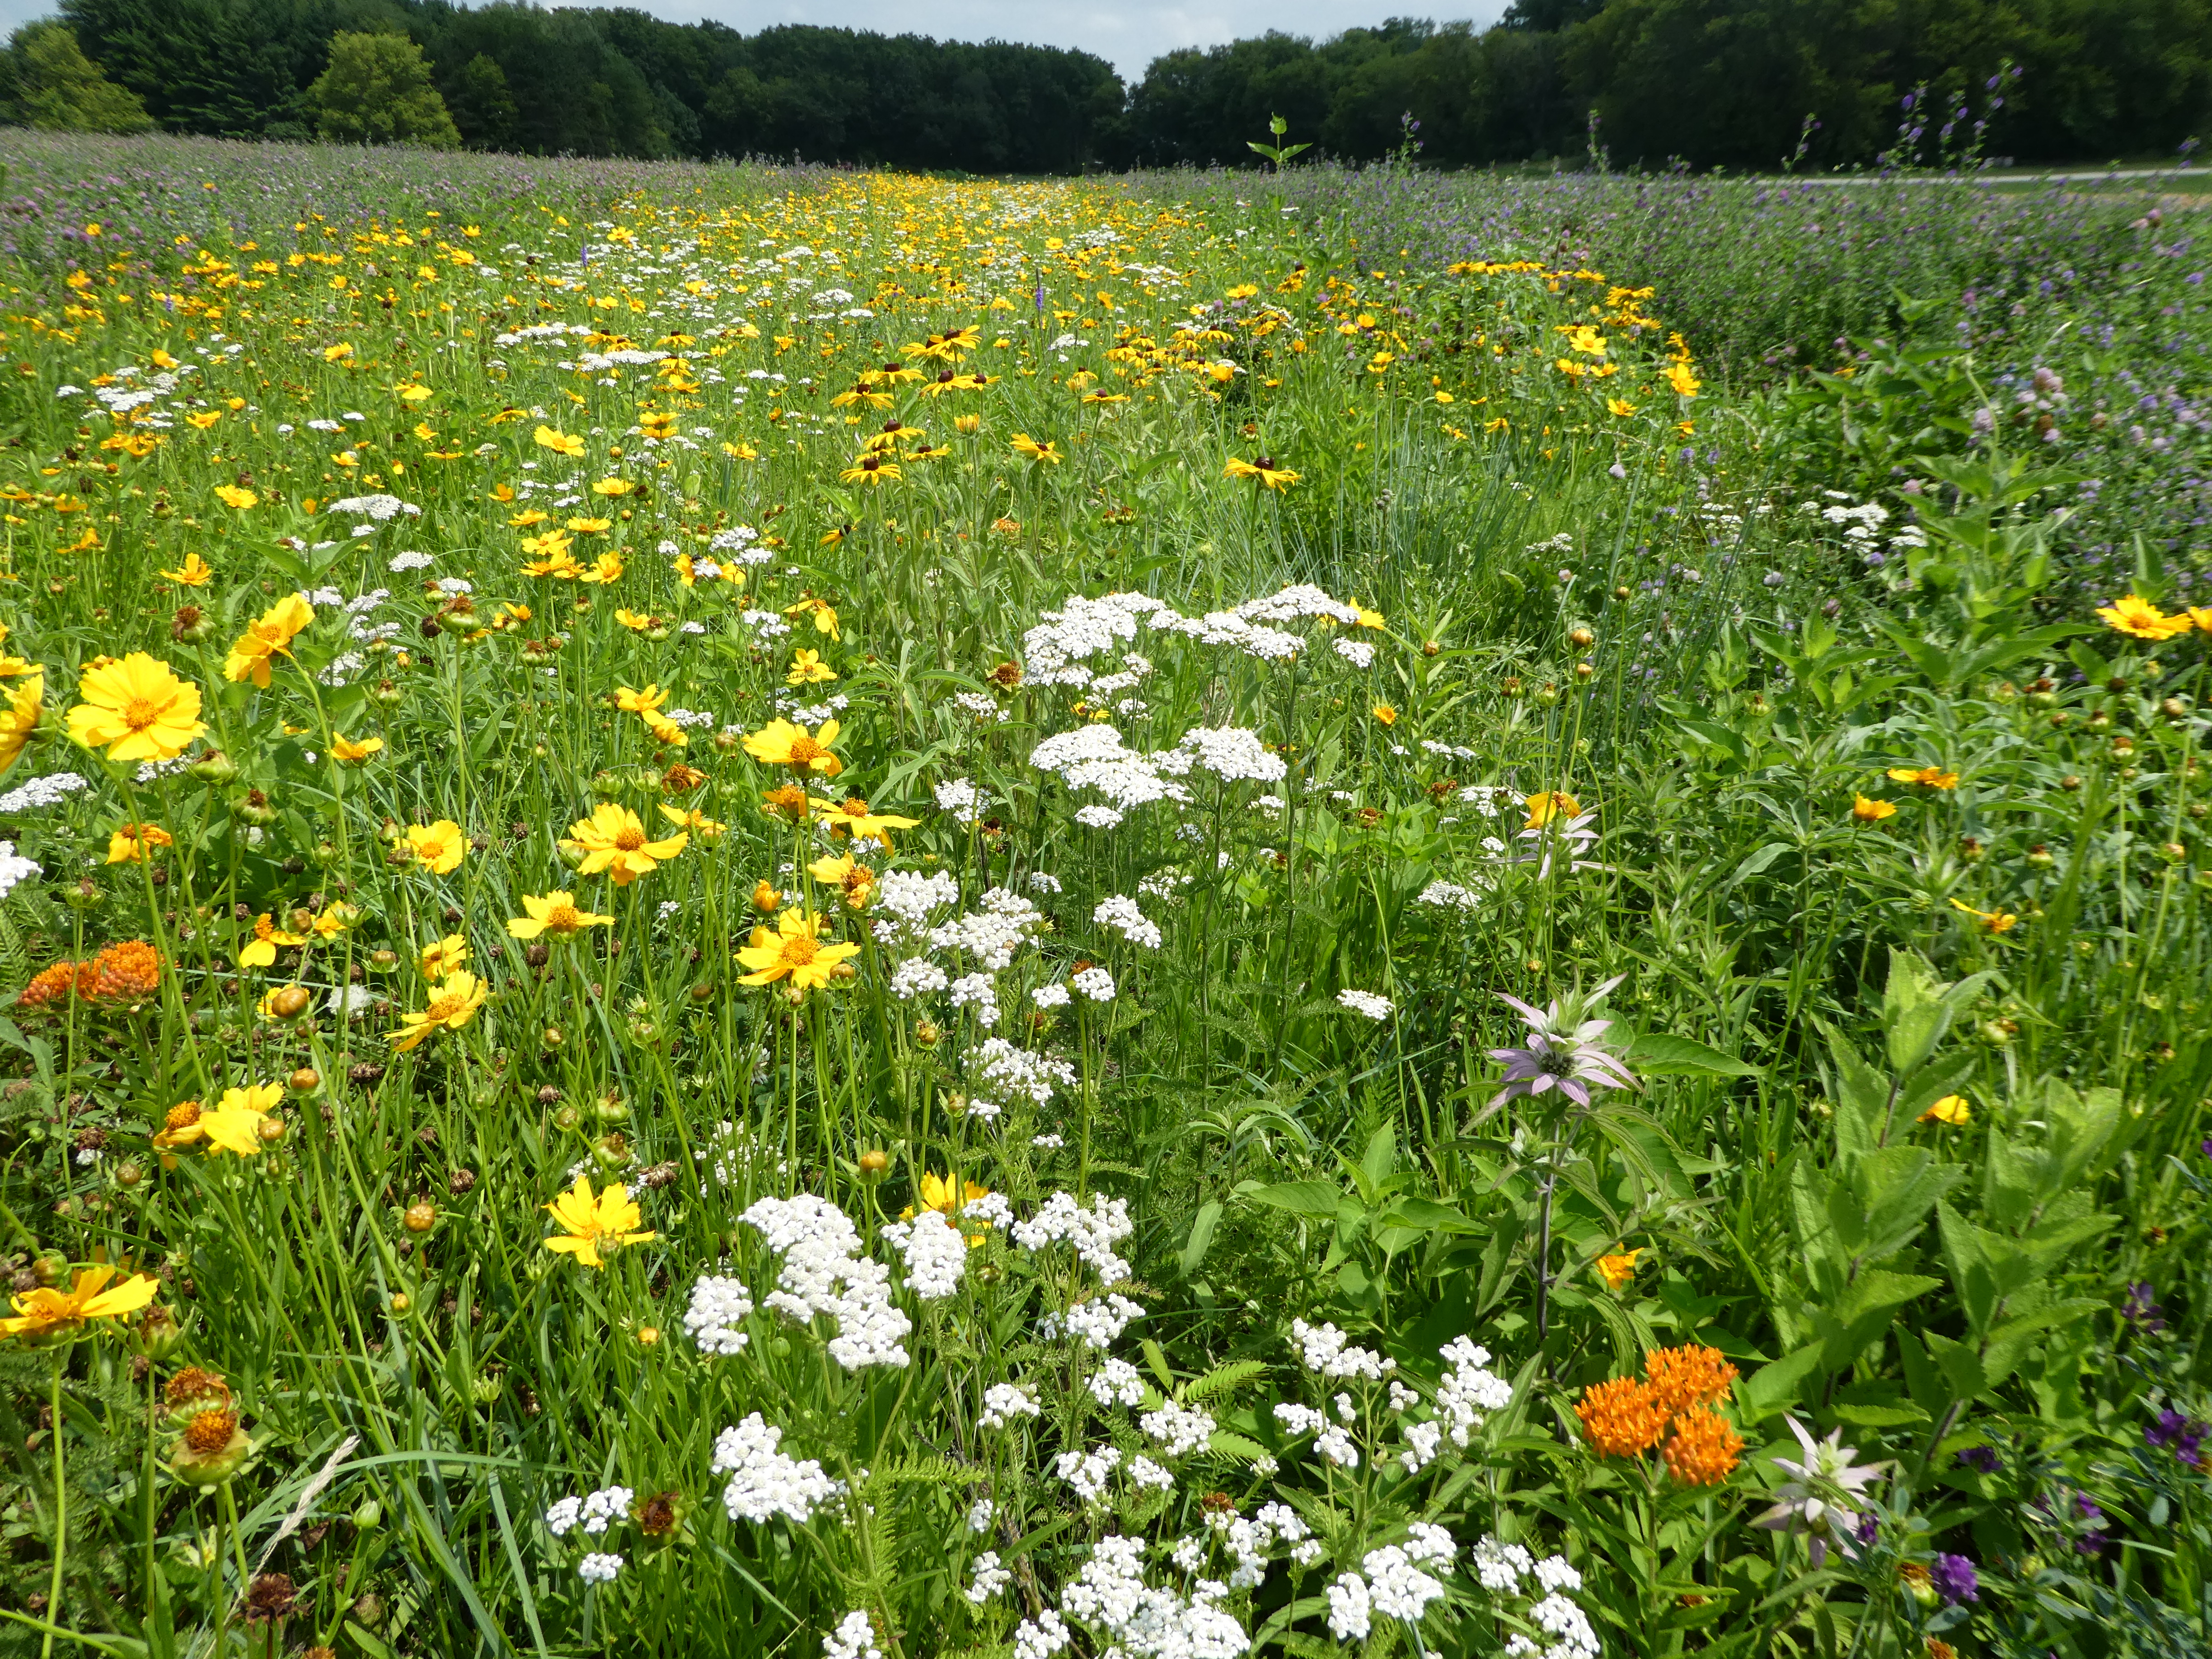 A field of wildflowers planted for pollinators.